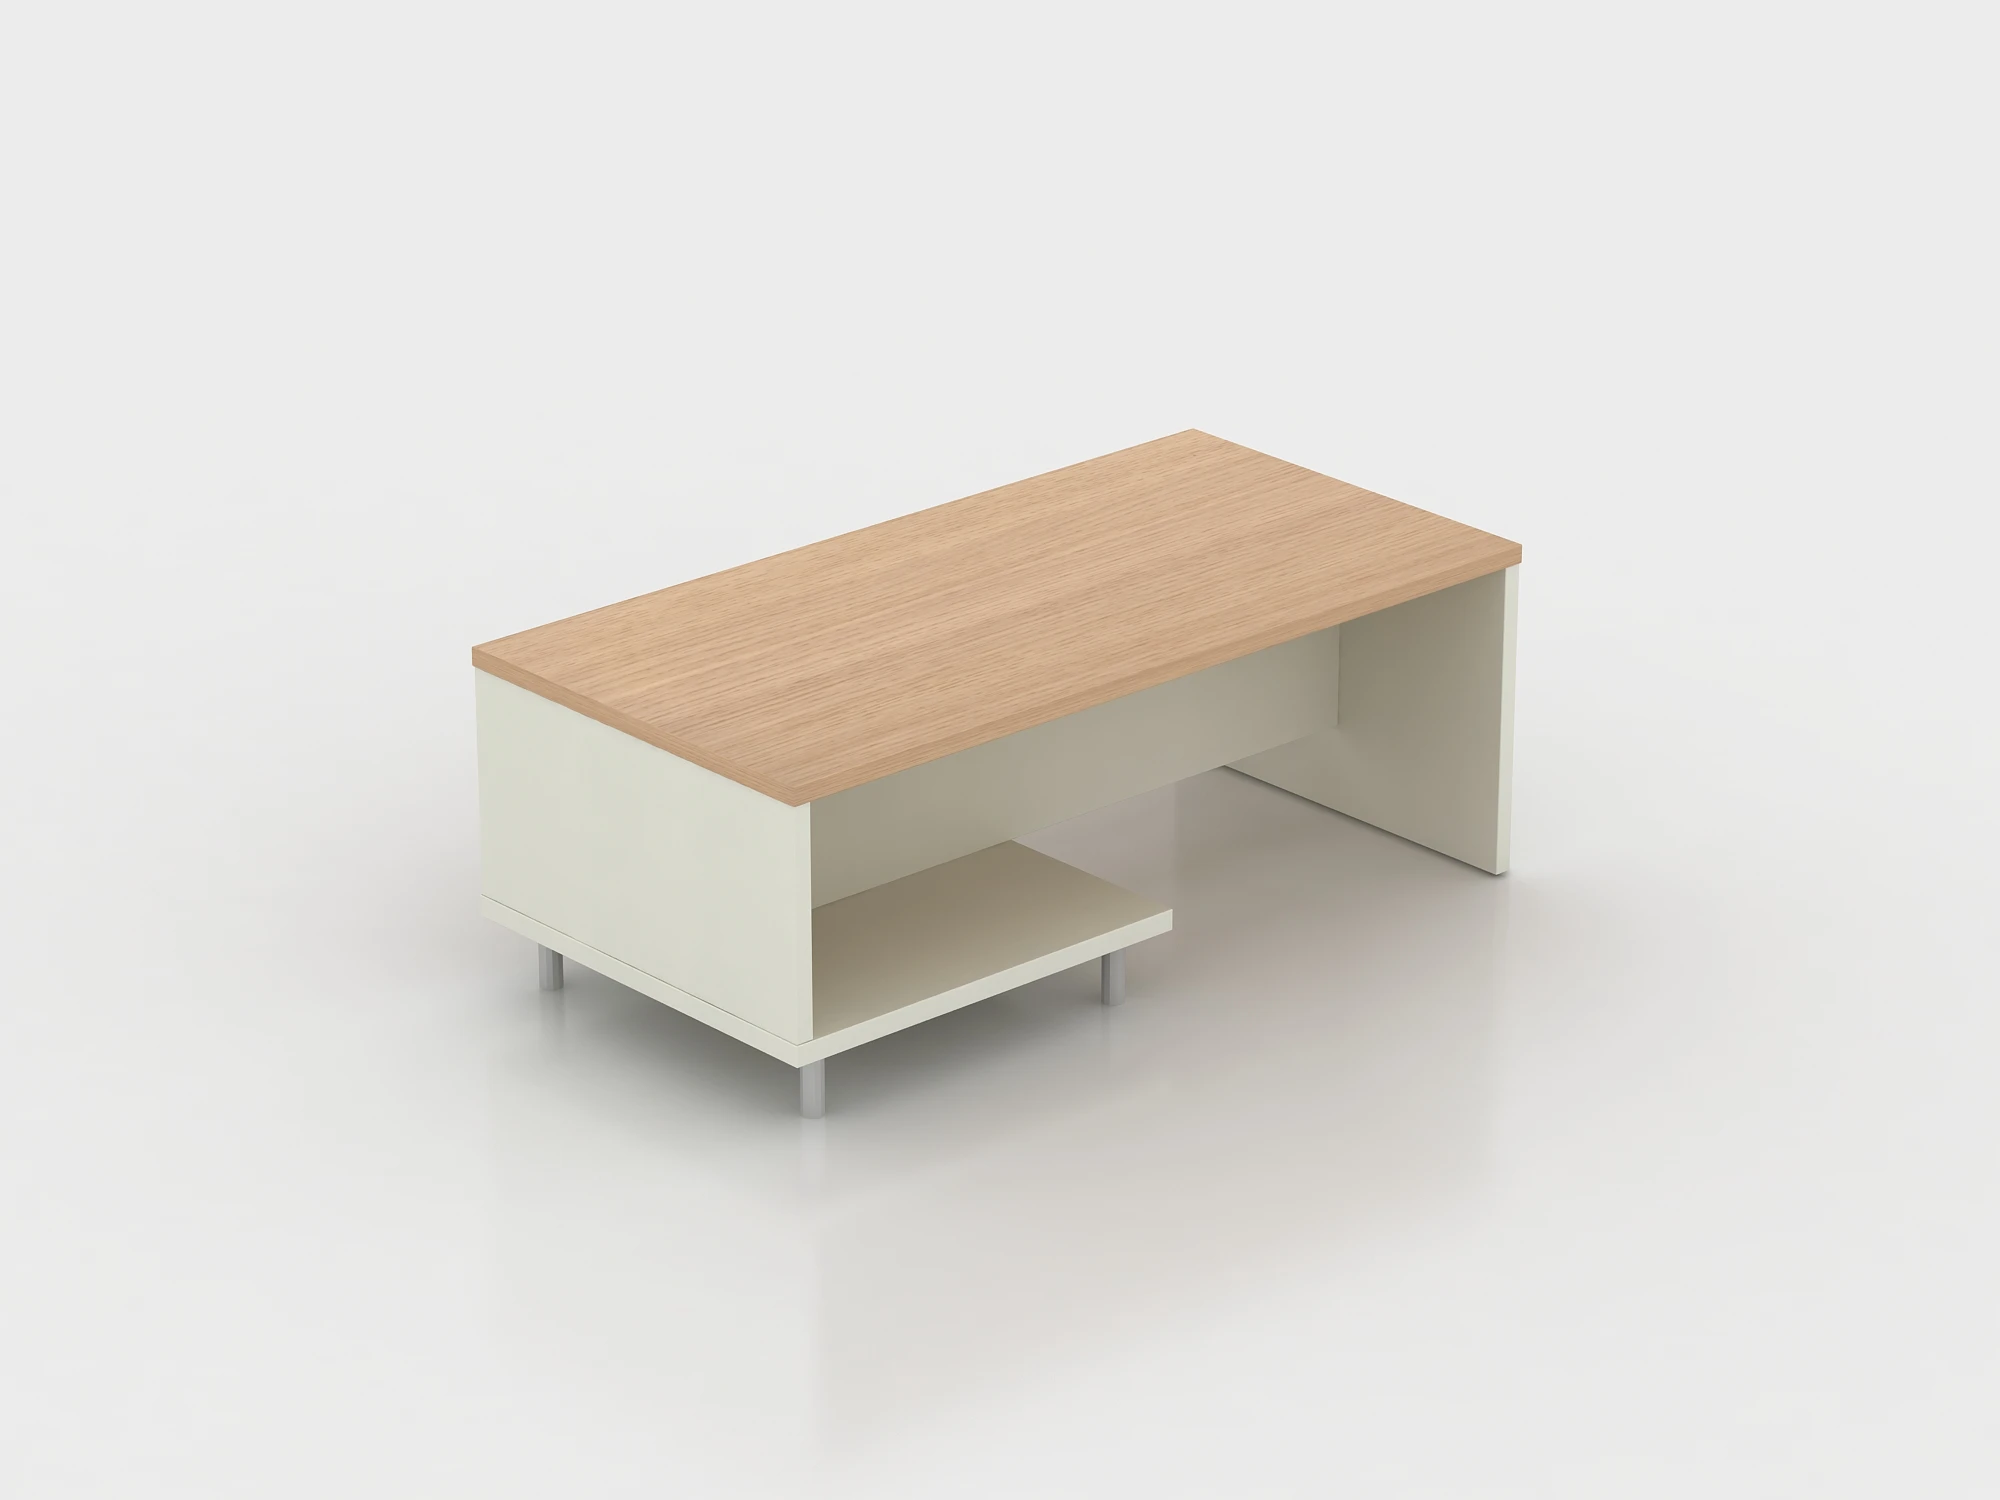 rounded rectangle coffee table